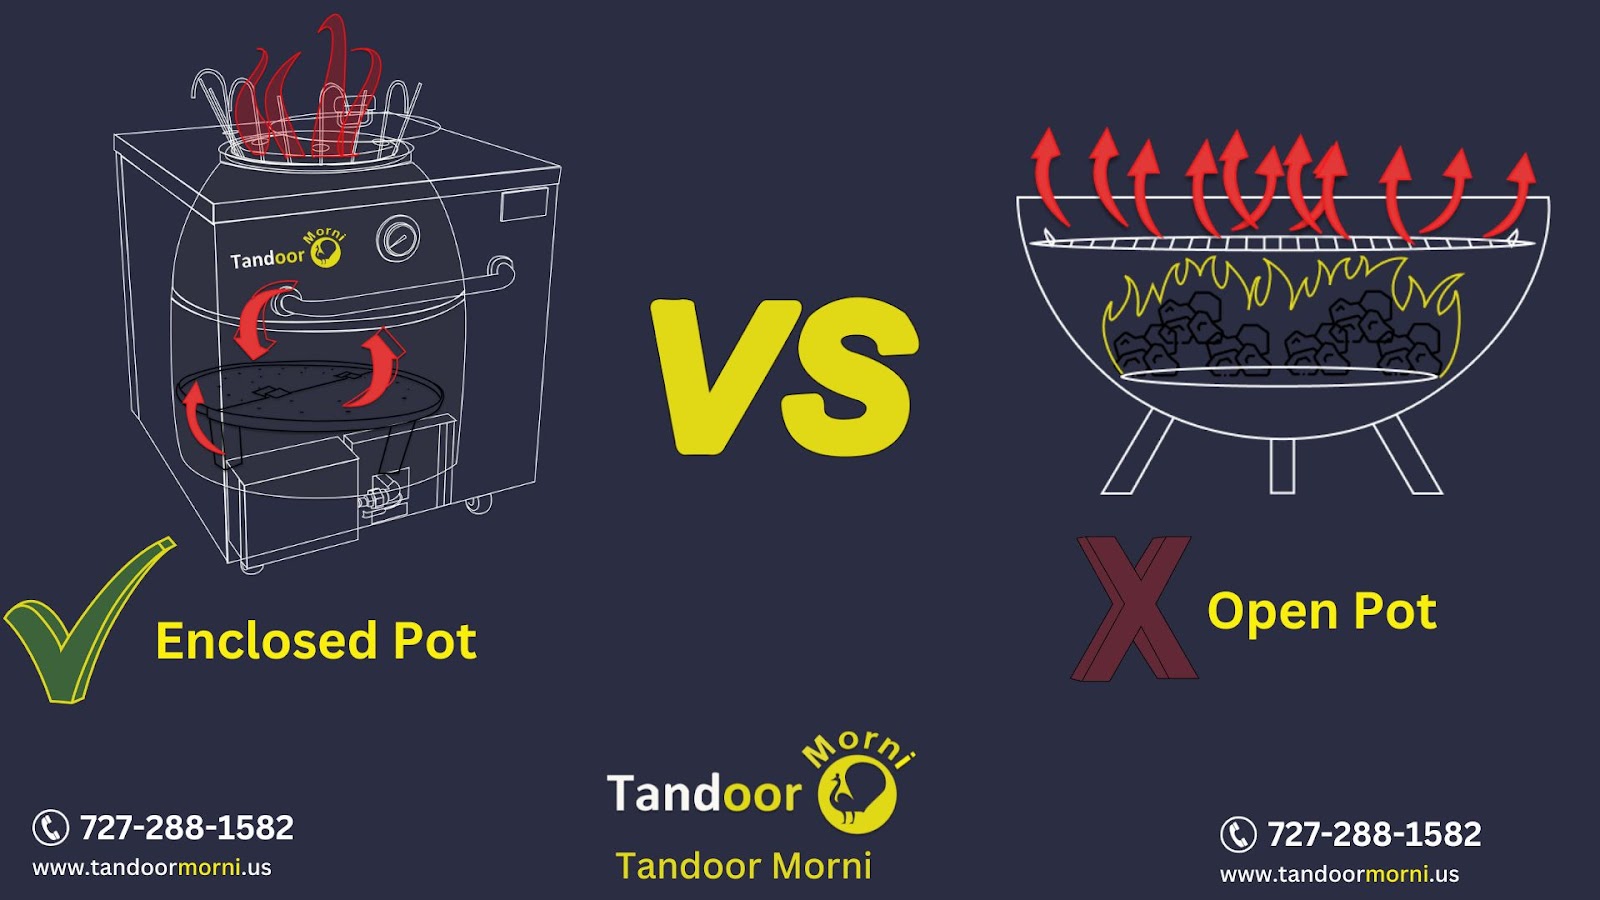 In this image, we see a bbq vs a tandoor oven, with the enclosed pot in the tandoor oven and the open pot in the bbq.